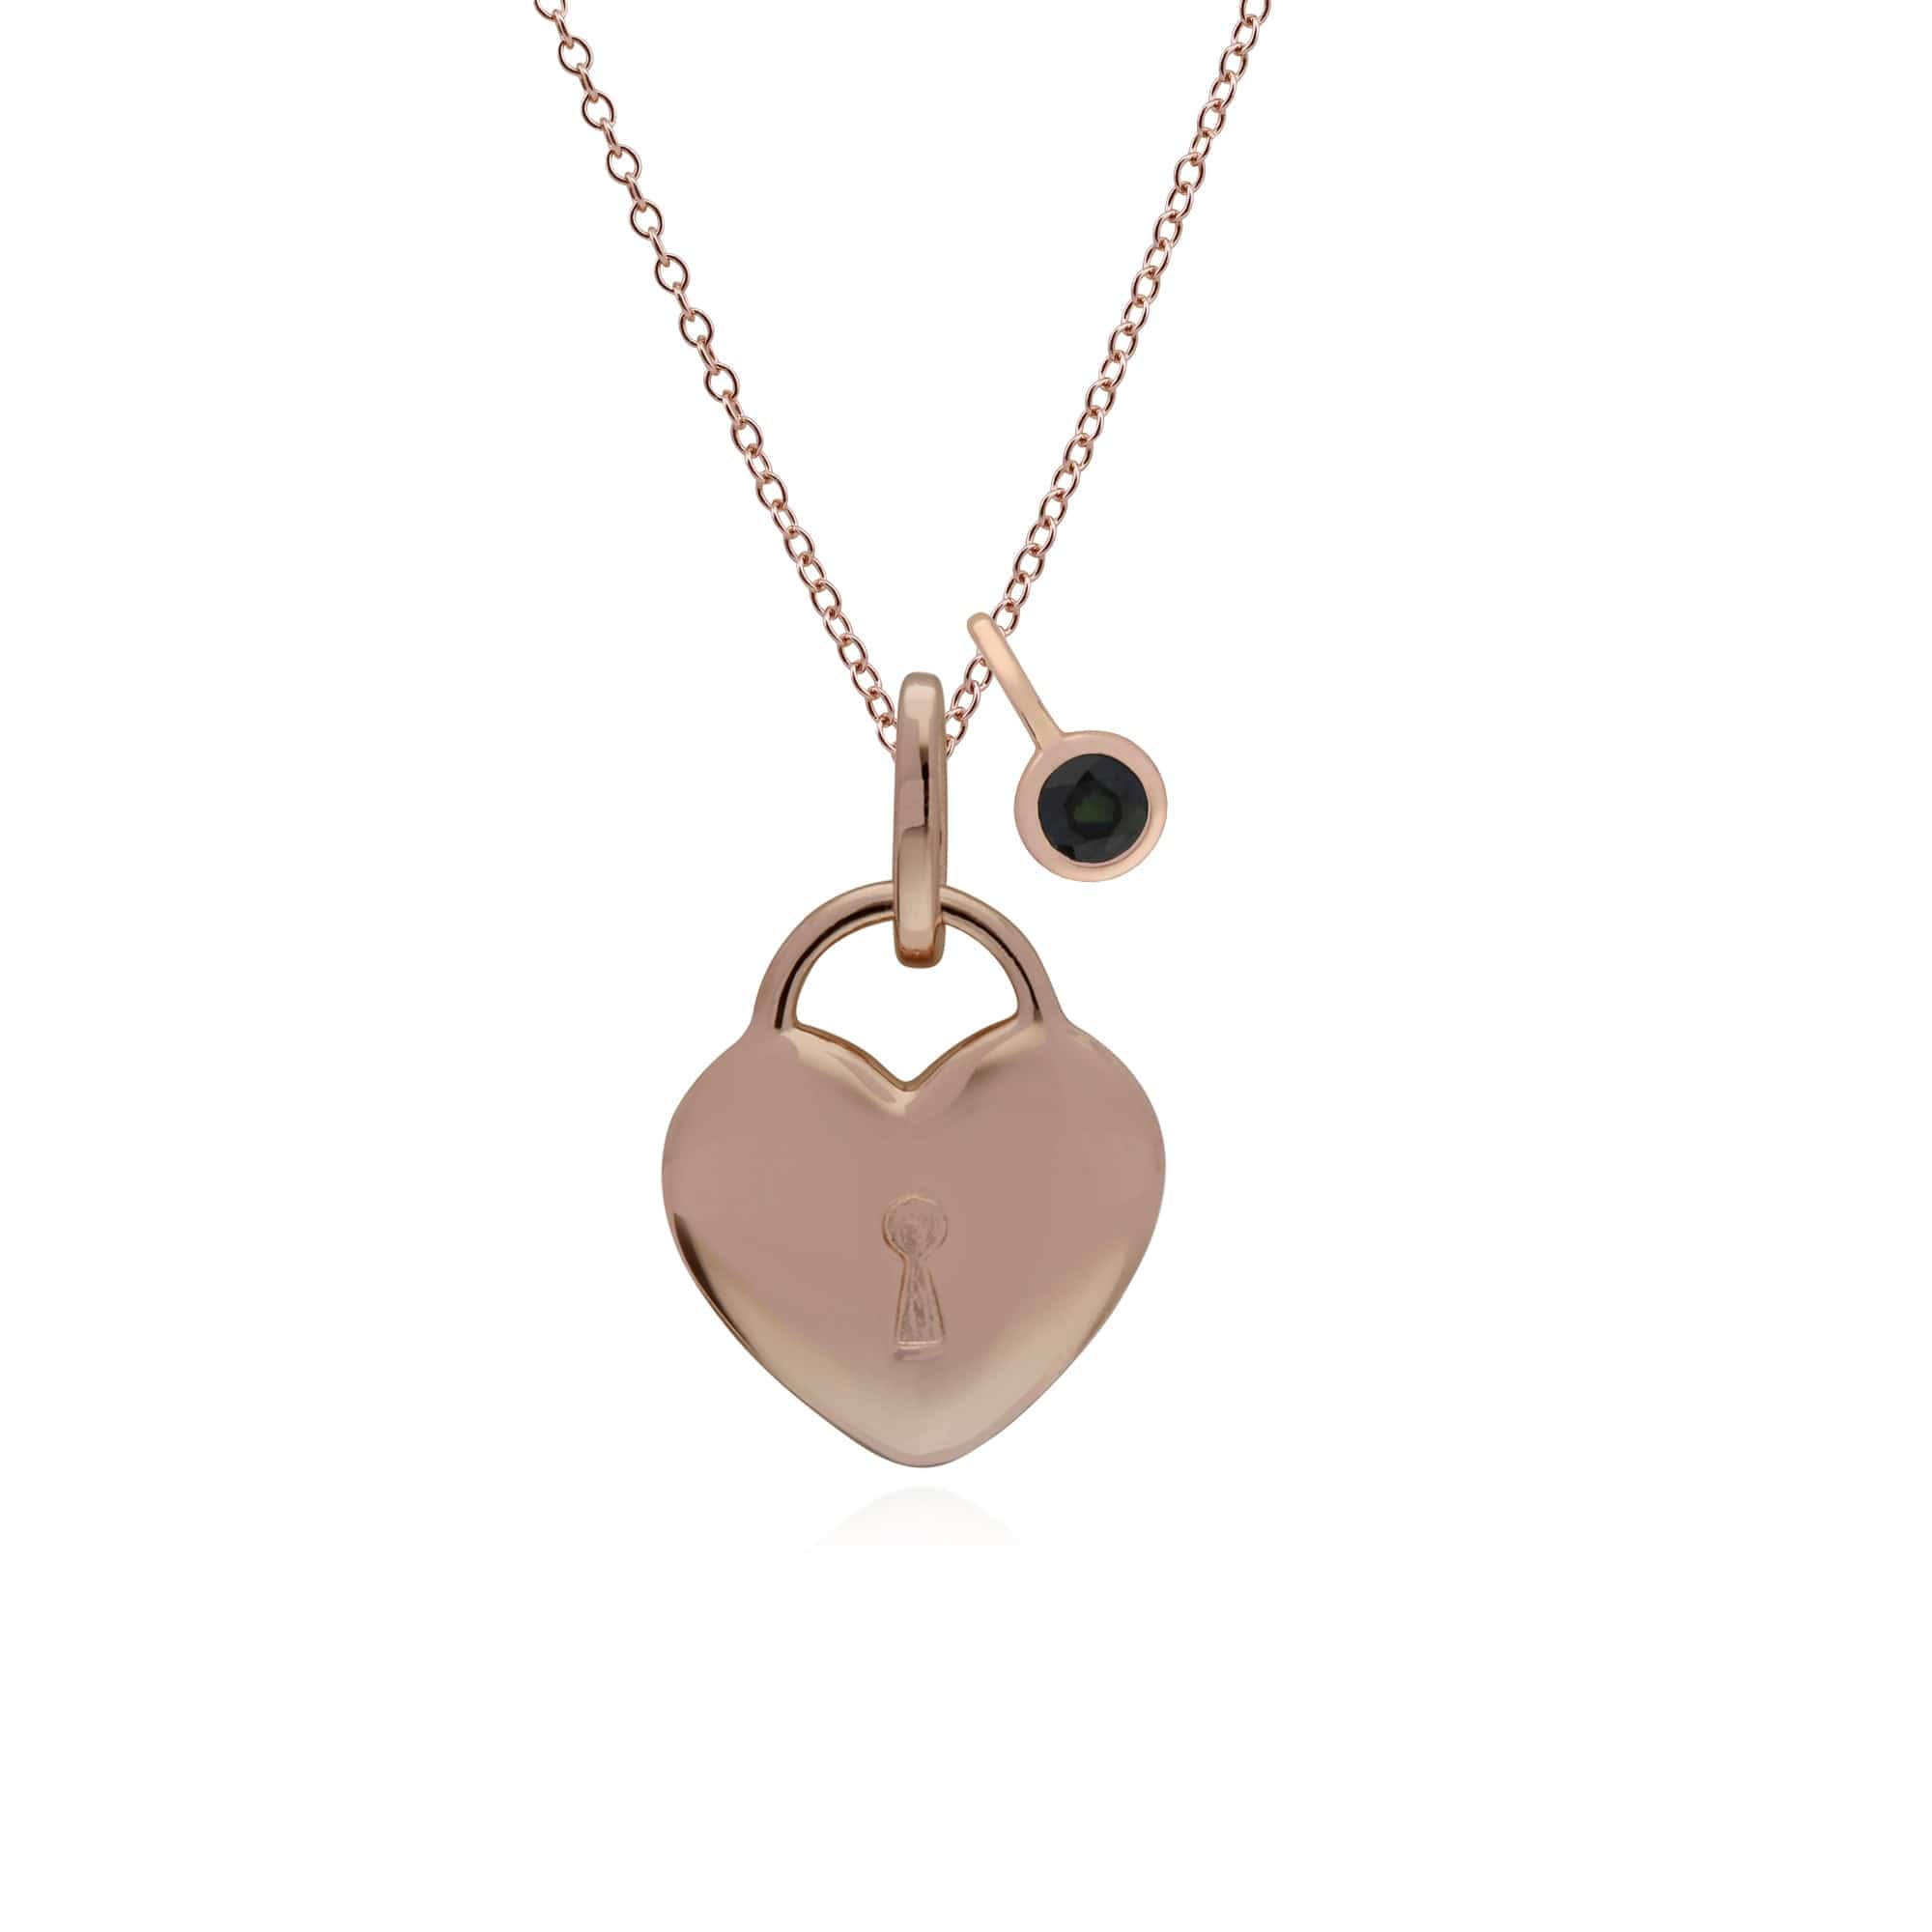 270P027310925-270P026901925 Classic Heart Lock Pendant & Sapphire Charm in Rose Gold Plated 925 Sterling Silver 1